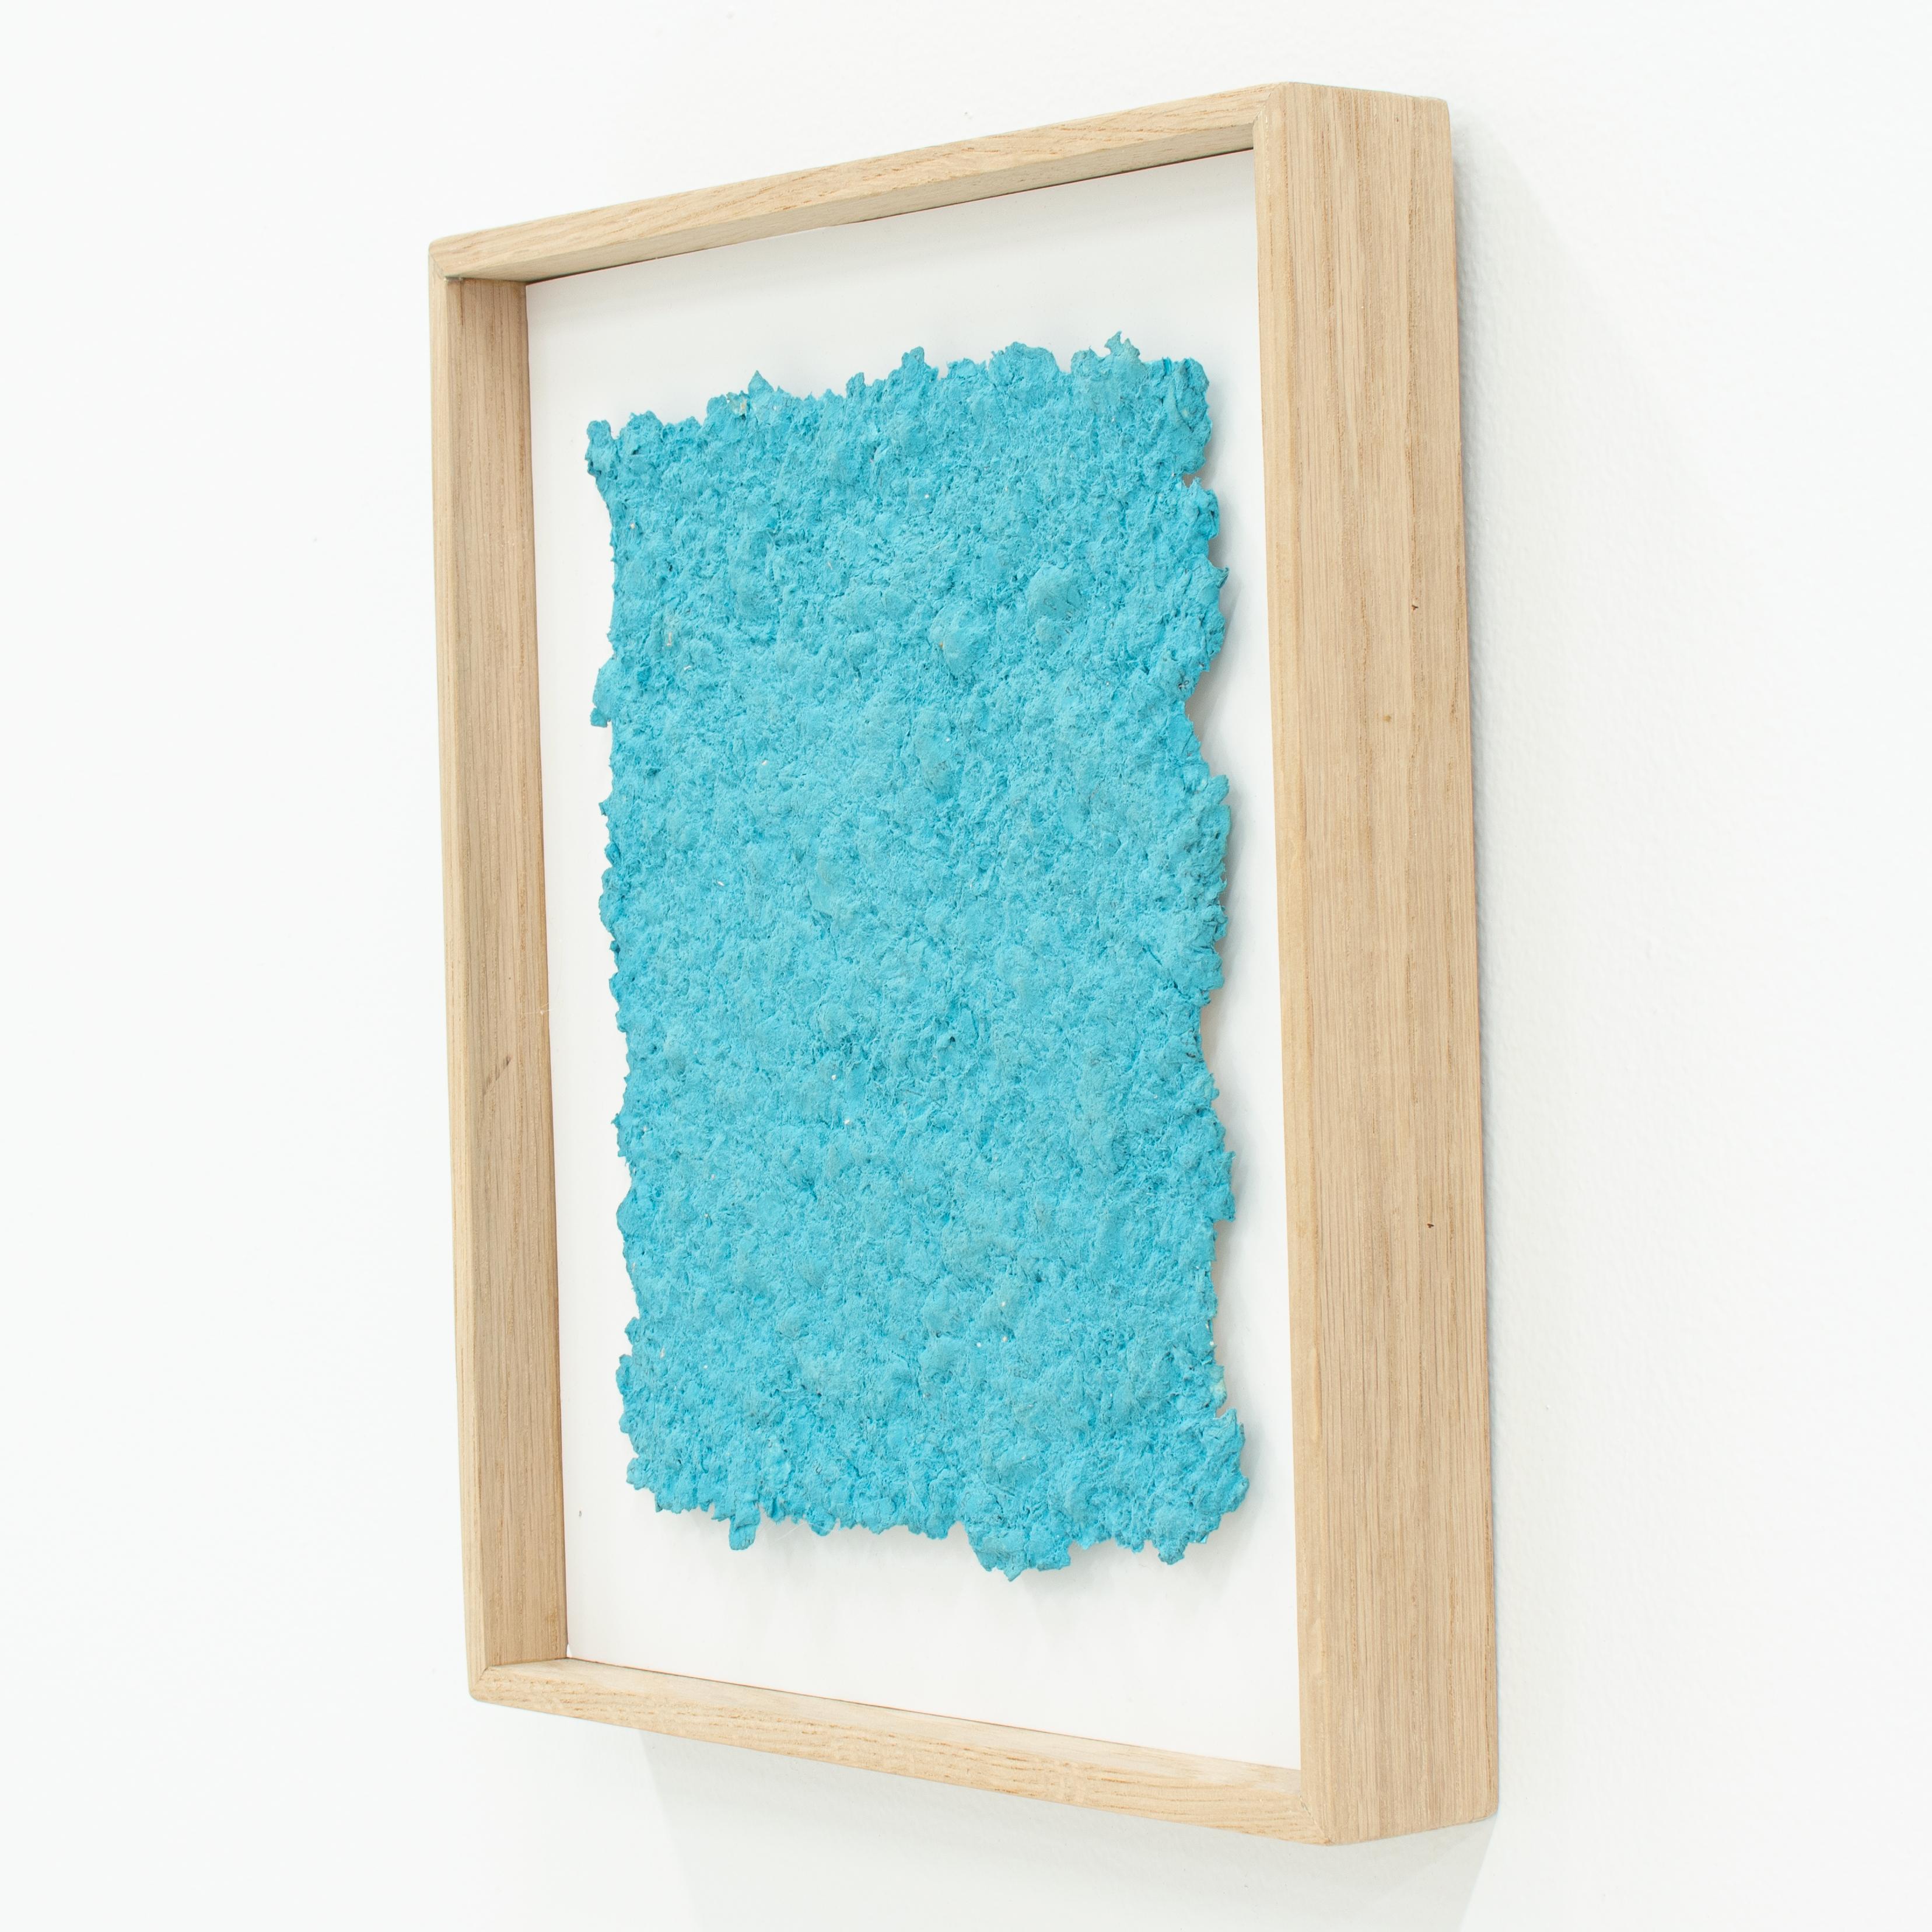 P 300 Series, Calm Blue - textured book pages & pigment in open oak wood frame  - Minimalist Mixed Media Art by Austin Kerr